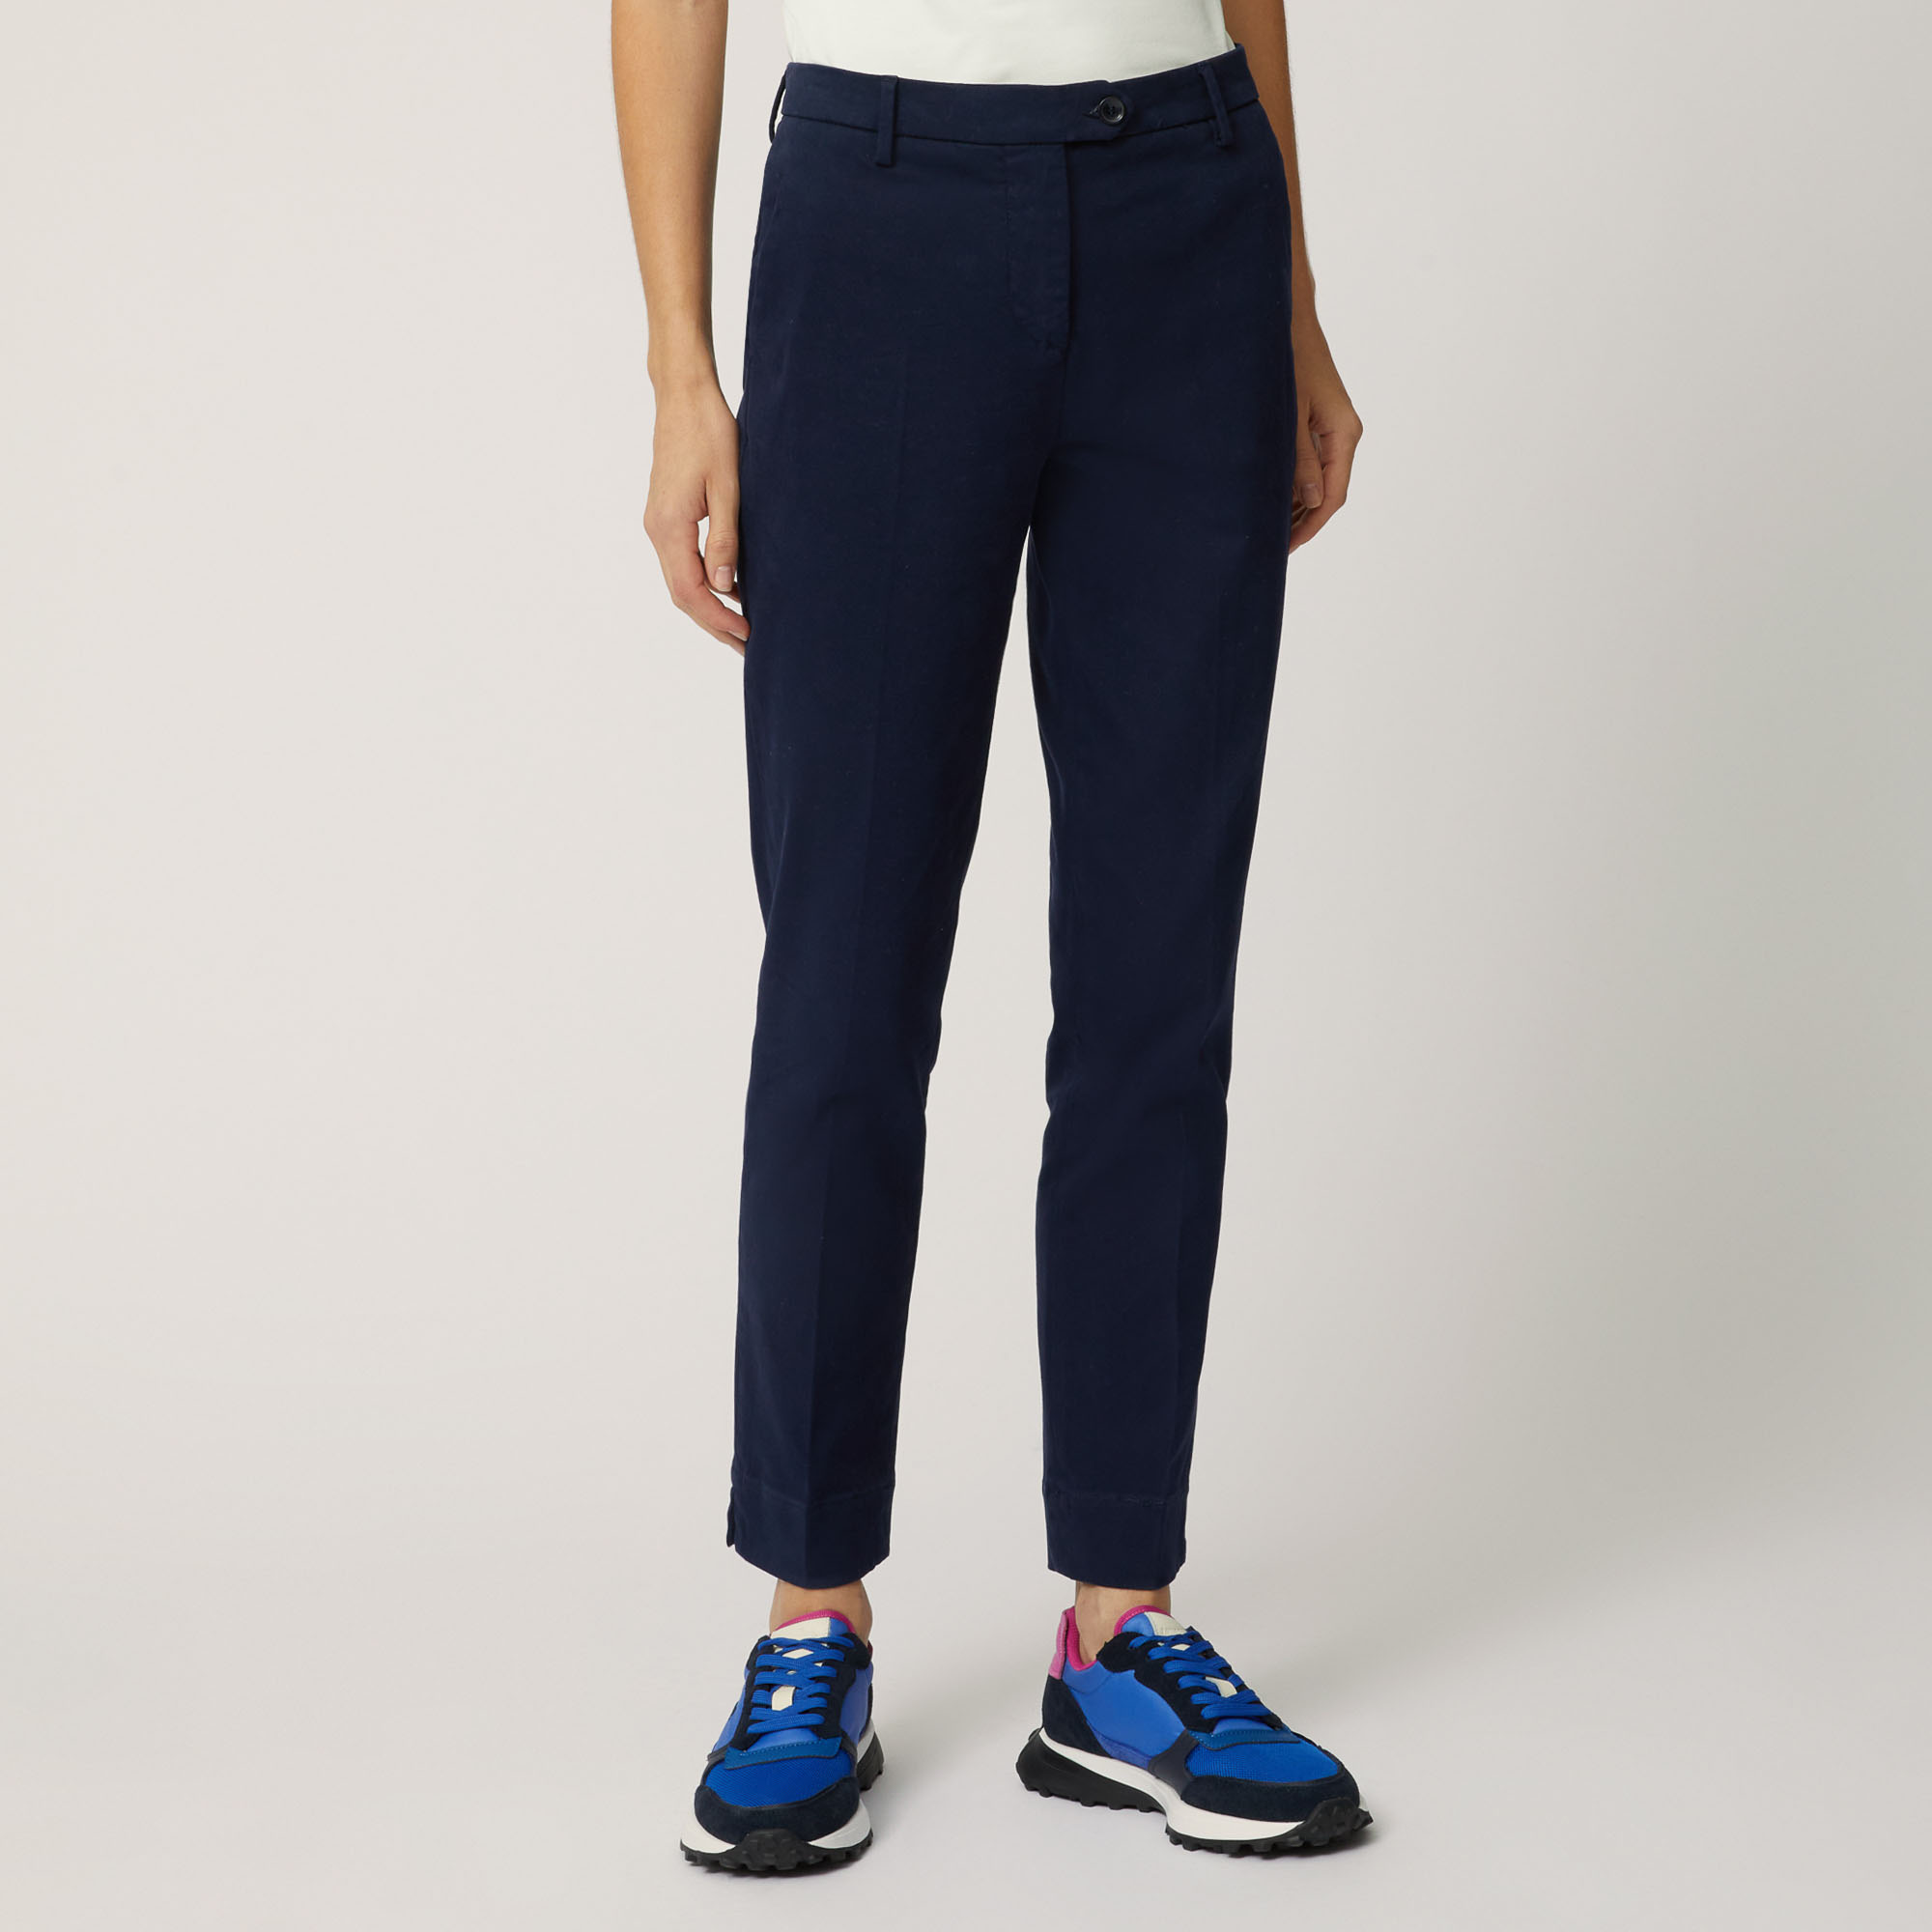 Pantalone Chino In Cotone Stretch, Blu Navy, large image number 0